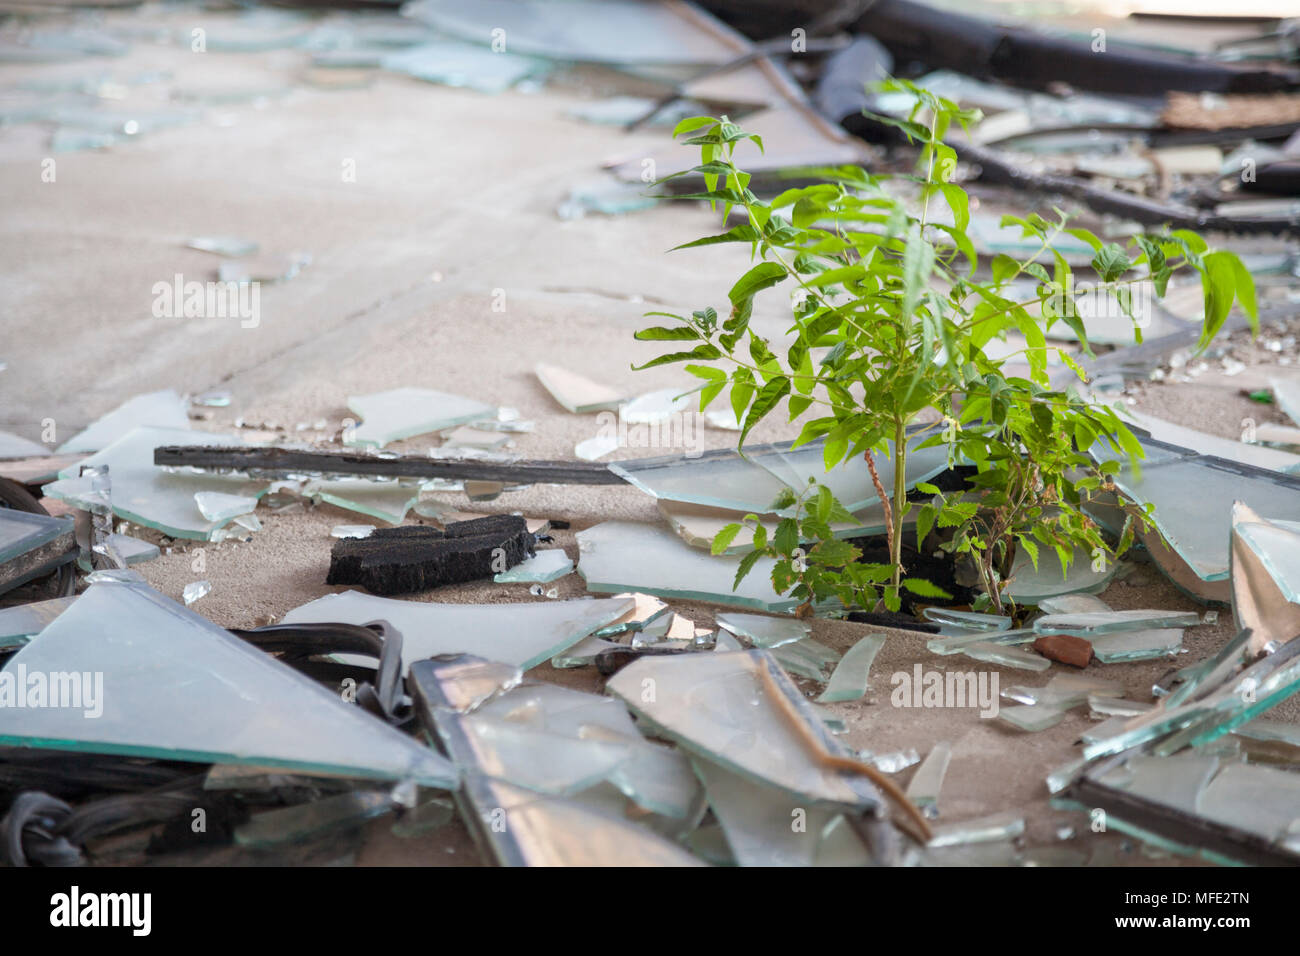 A sapling growing among broke glass in a bombed out building from the Bosnian War in Mostar, Bosnia and Herzegovina Stock Photo